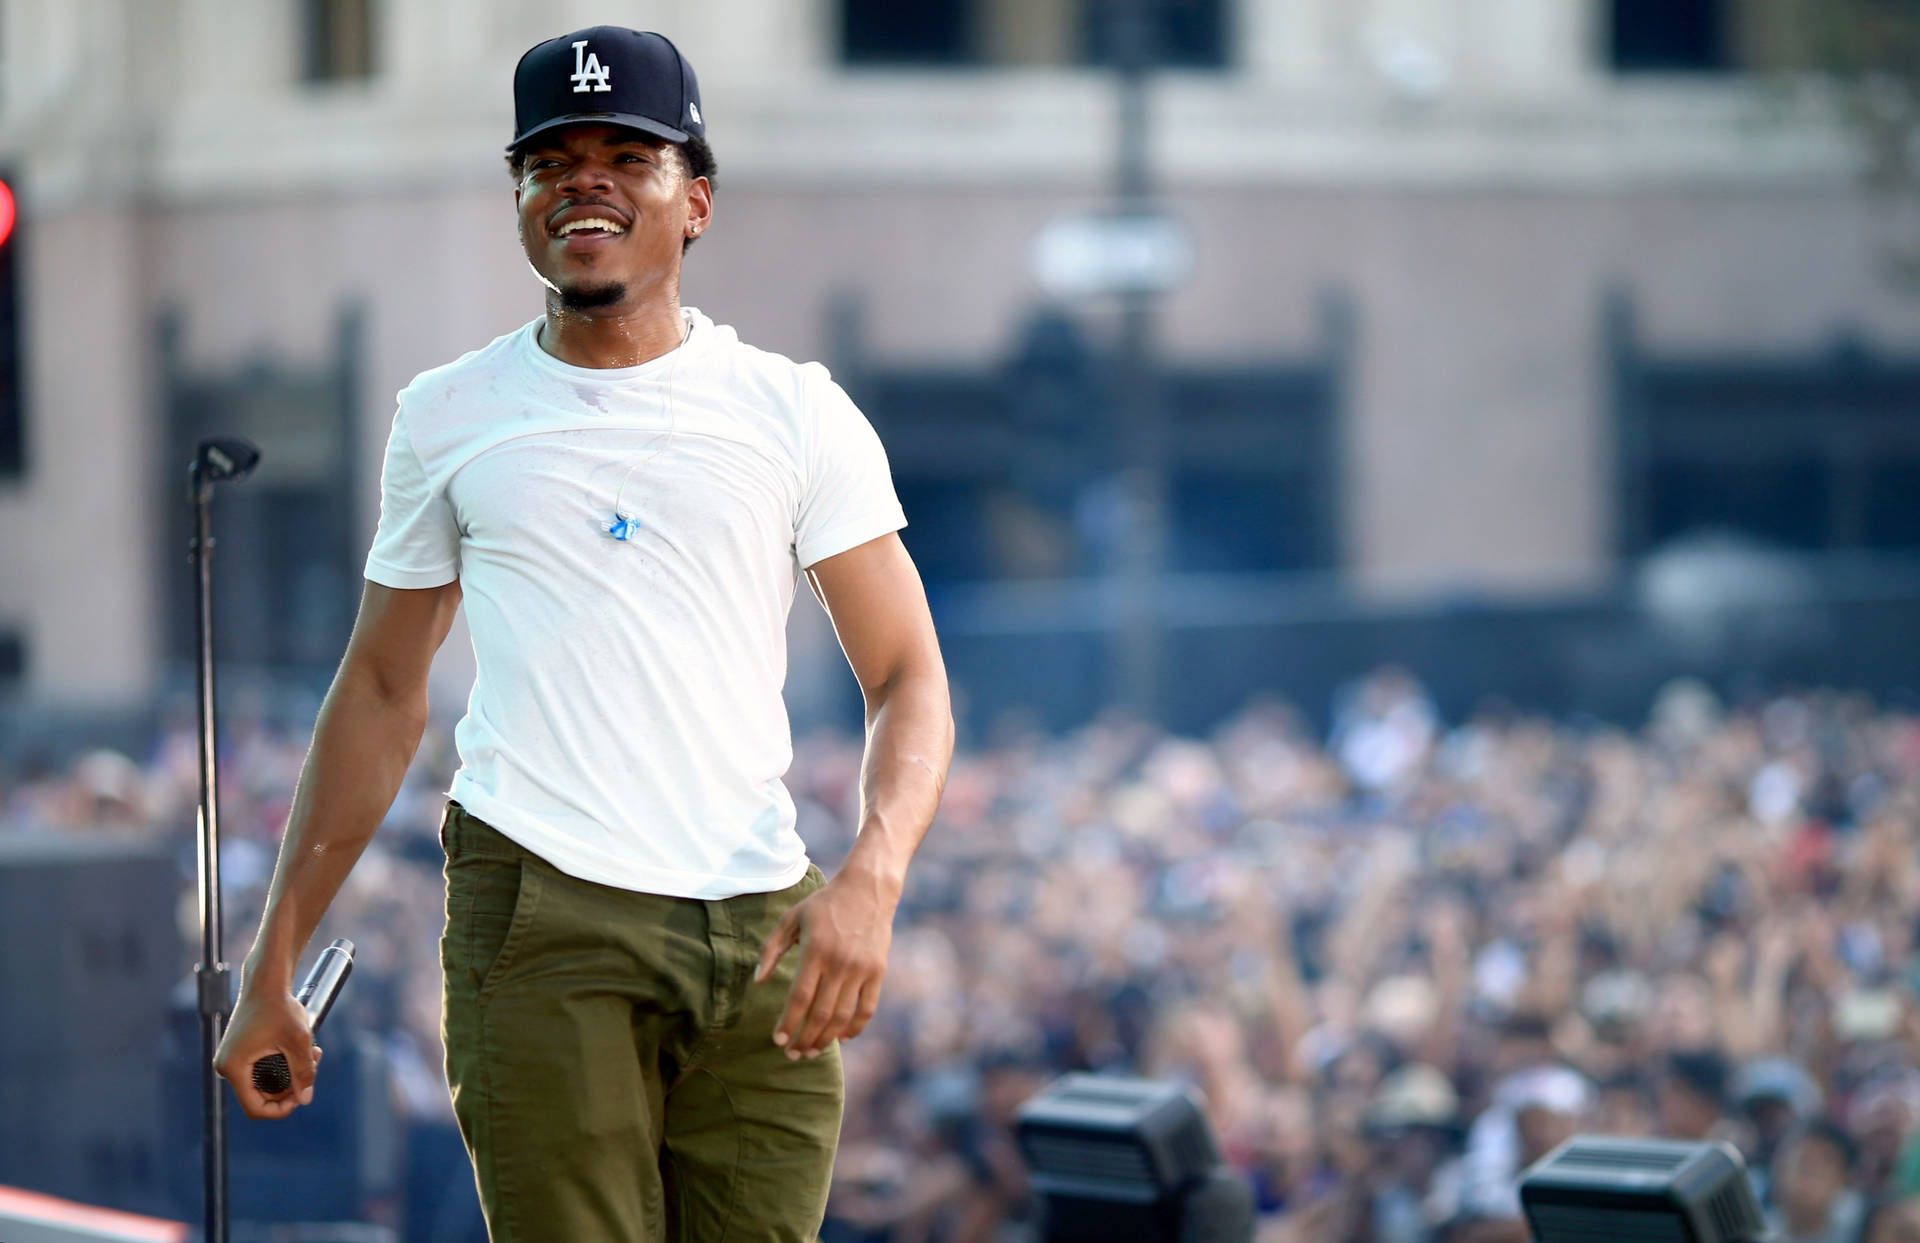 Download Chance The Rapper Crowd Wallpaper